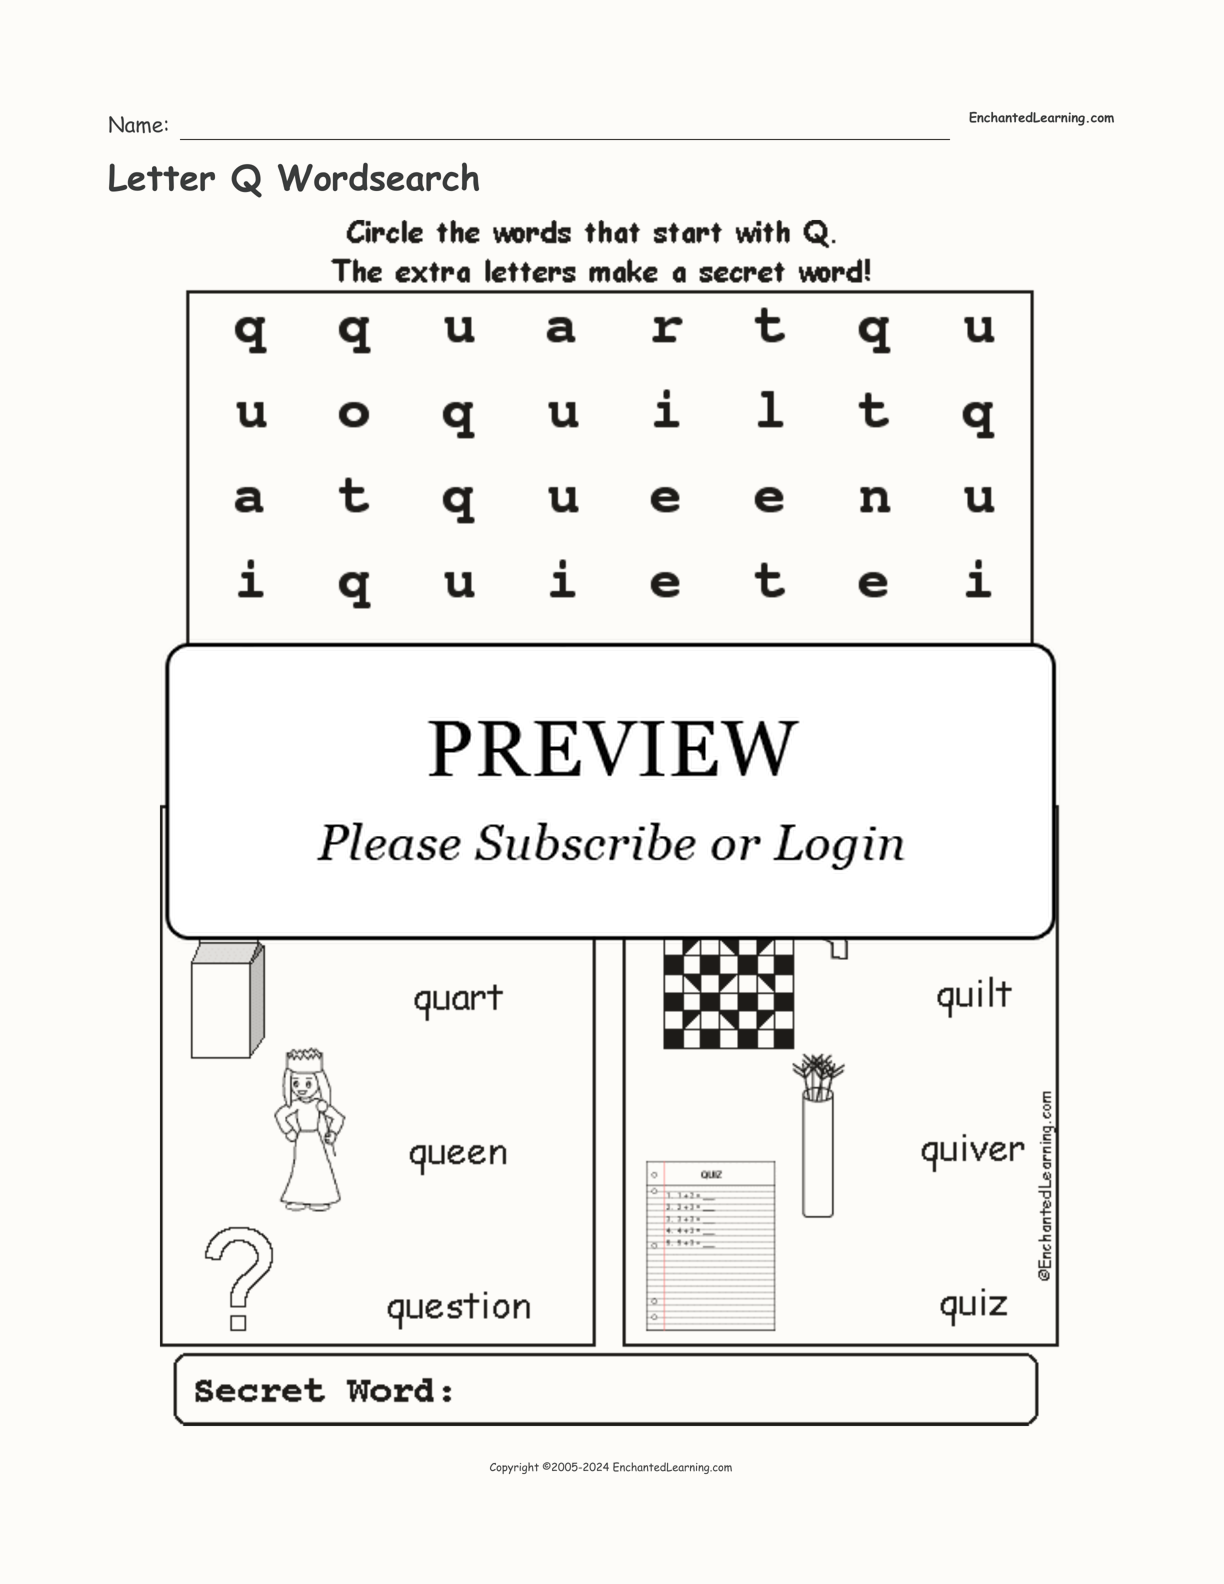 Letter Q Wordsearch interactive worksheet page 1